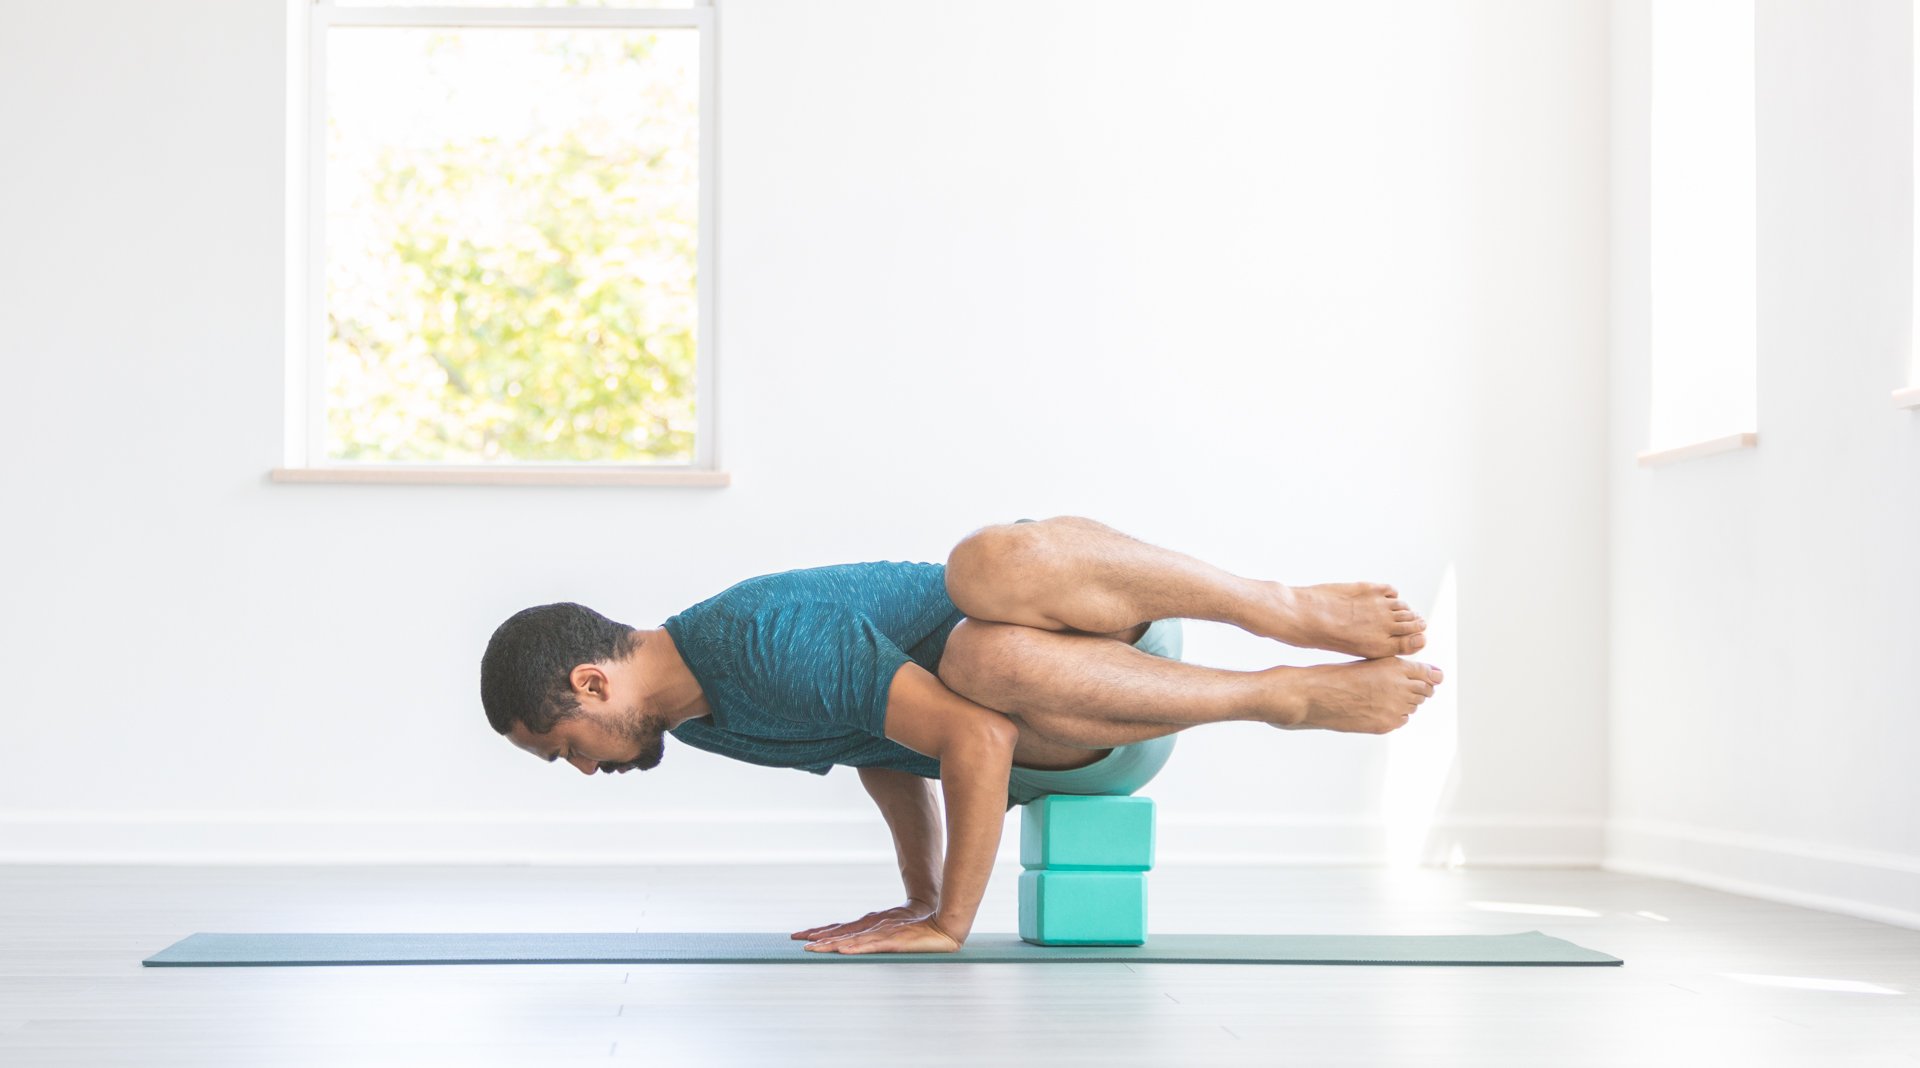 How to Do the Headstand Pose in Yoga Without Kicking Your Way Up | SELF